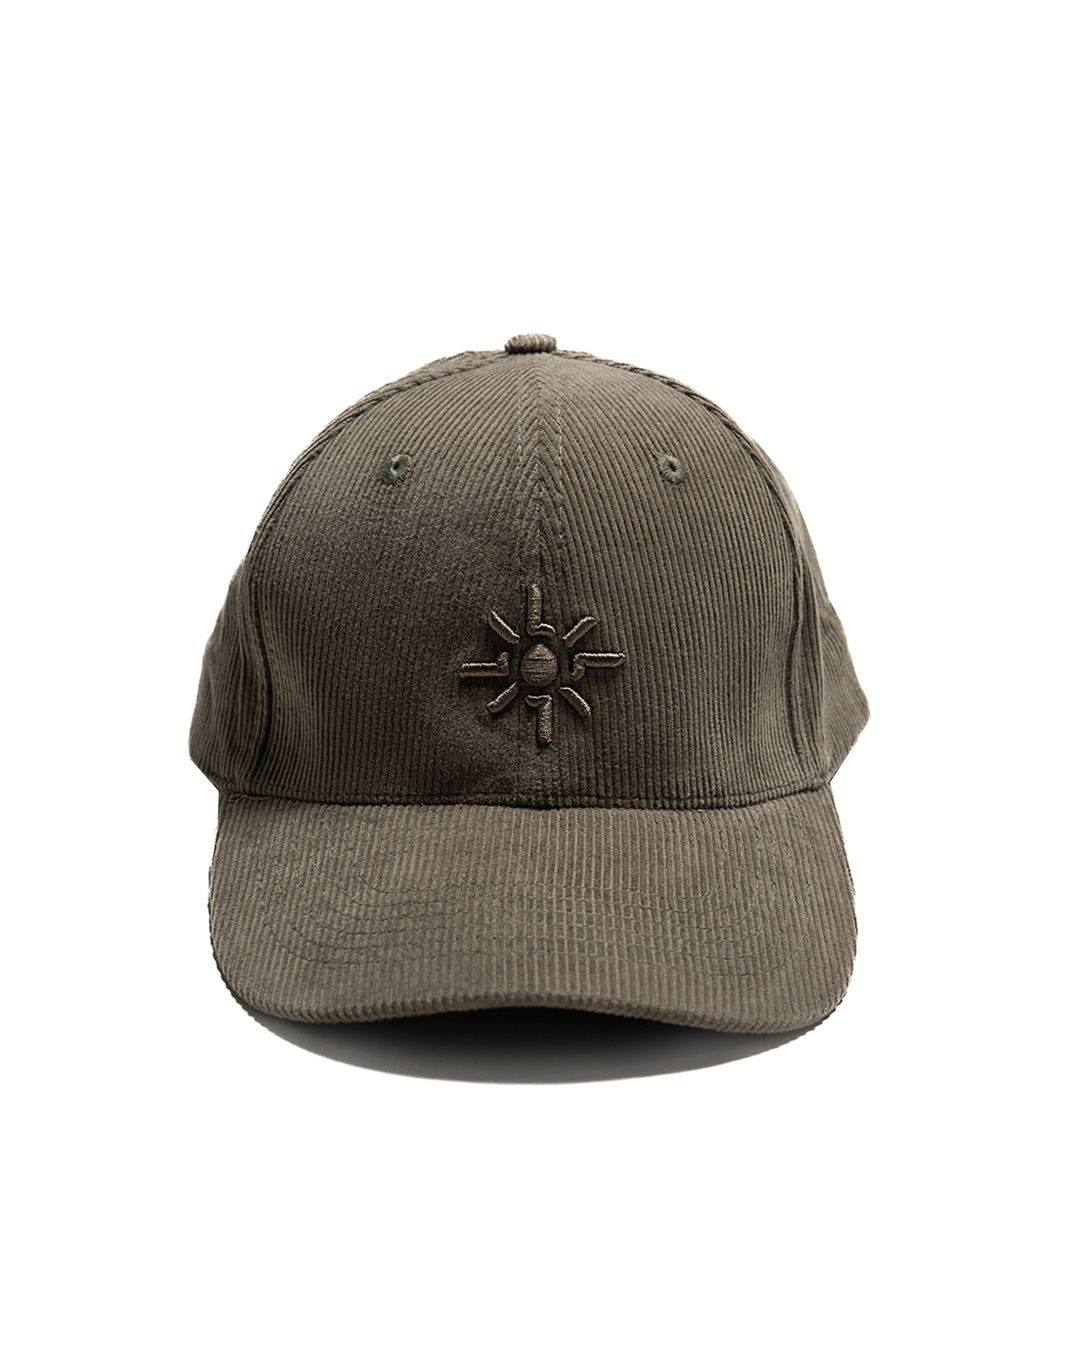 OLIVE GREEN EMBROIDERED LOGO CAP